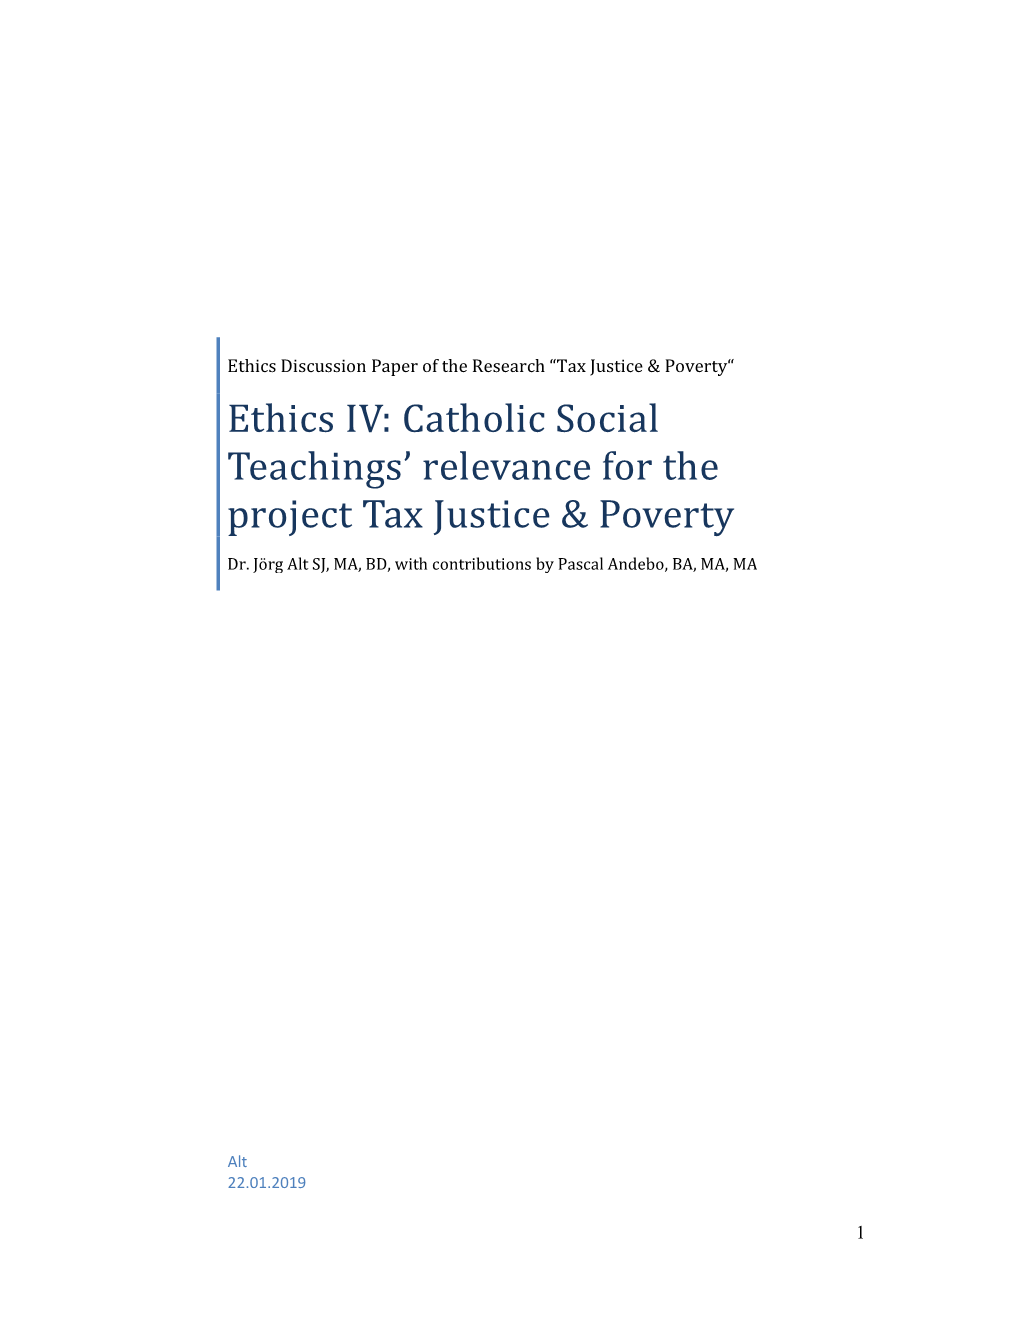 Catholic Social Teachings' Relevance for the Project Tax Justice & Poverty